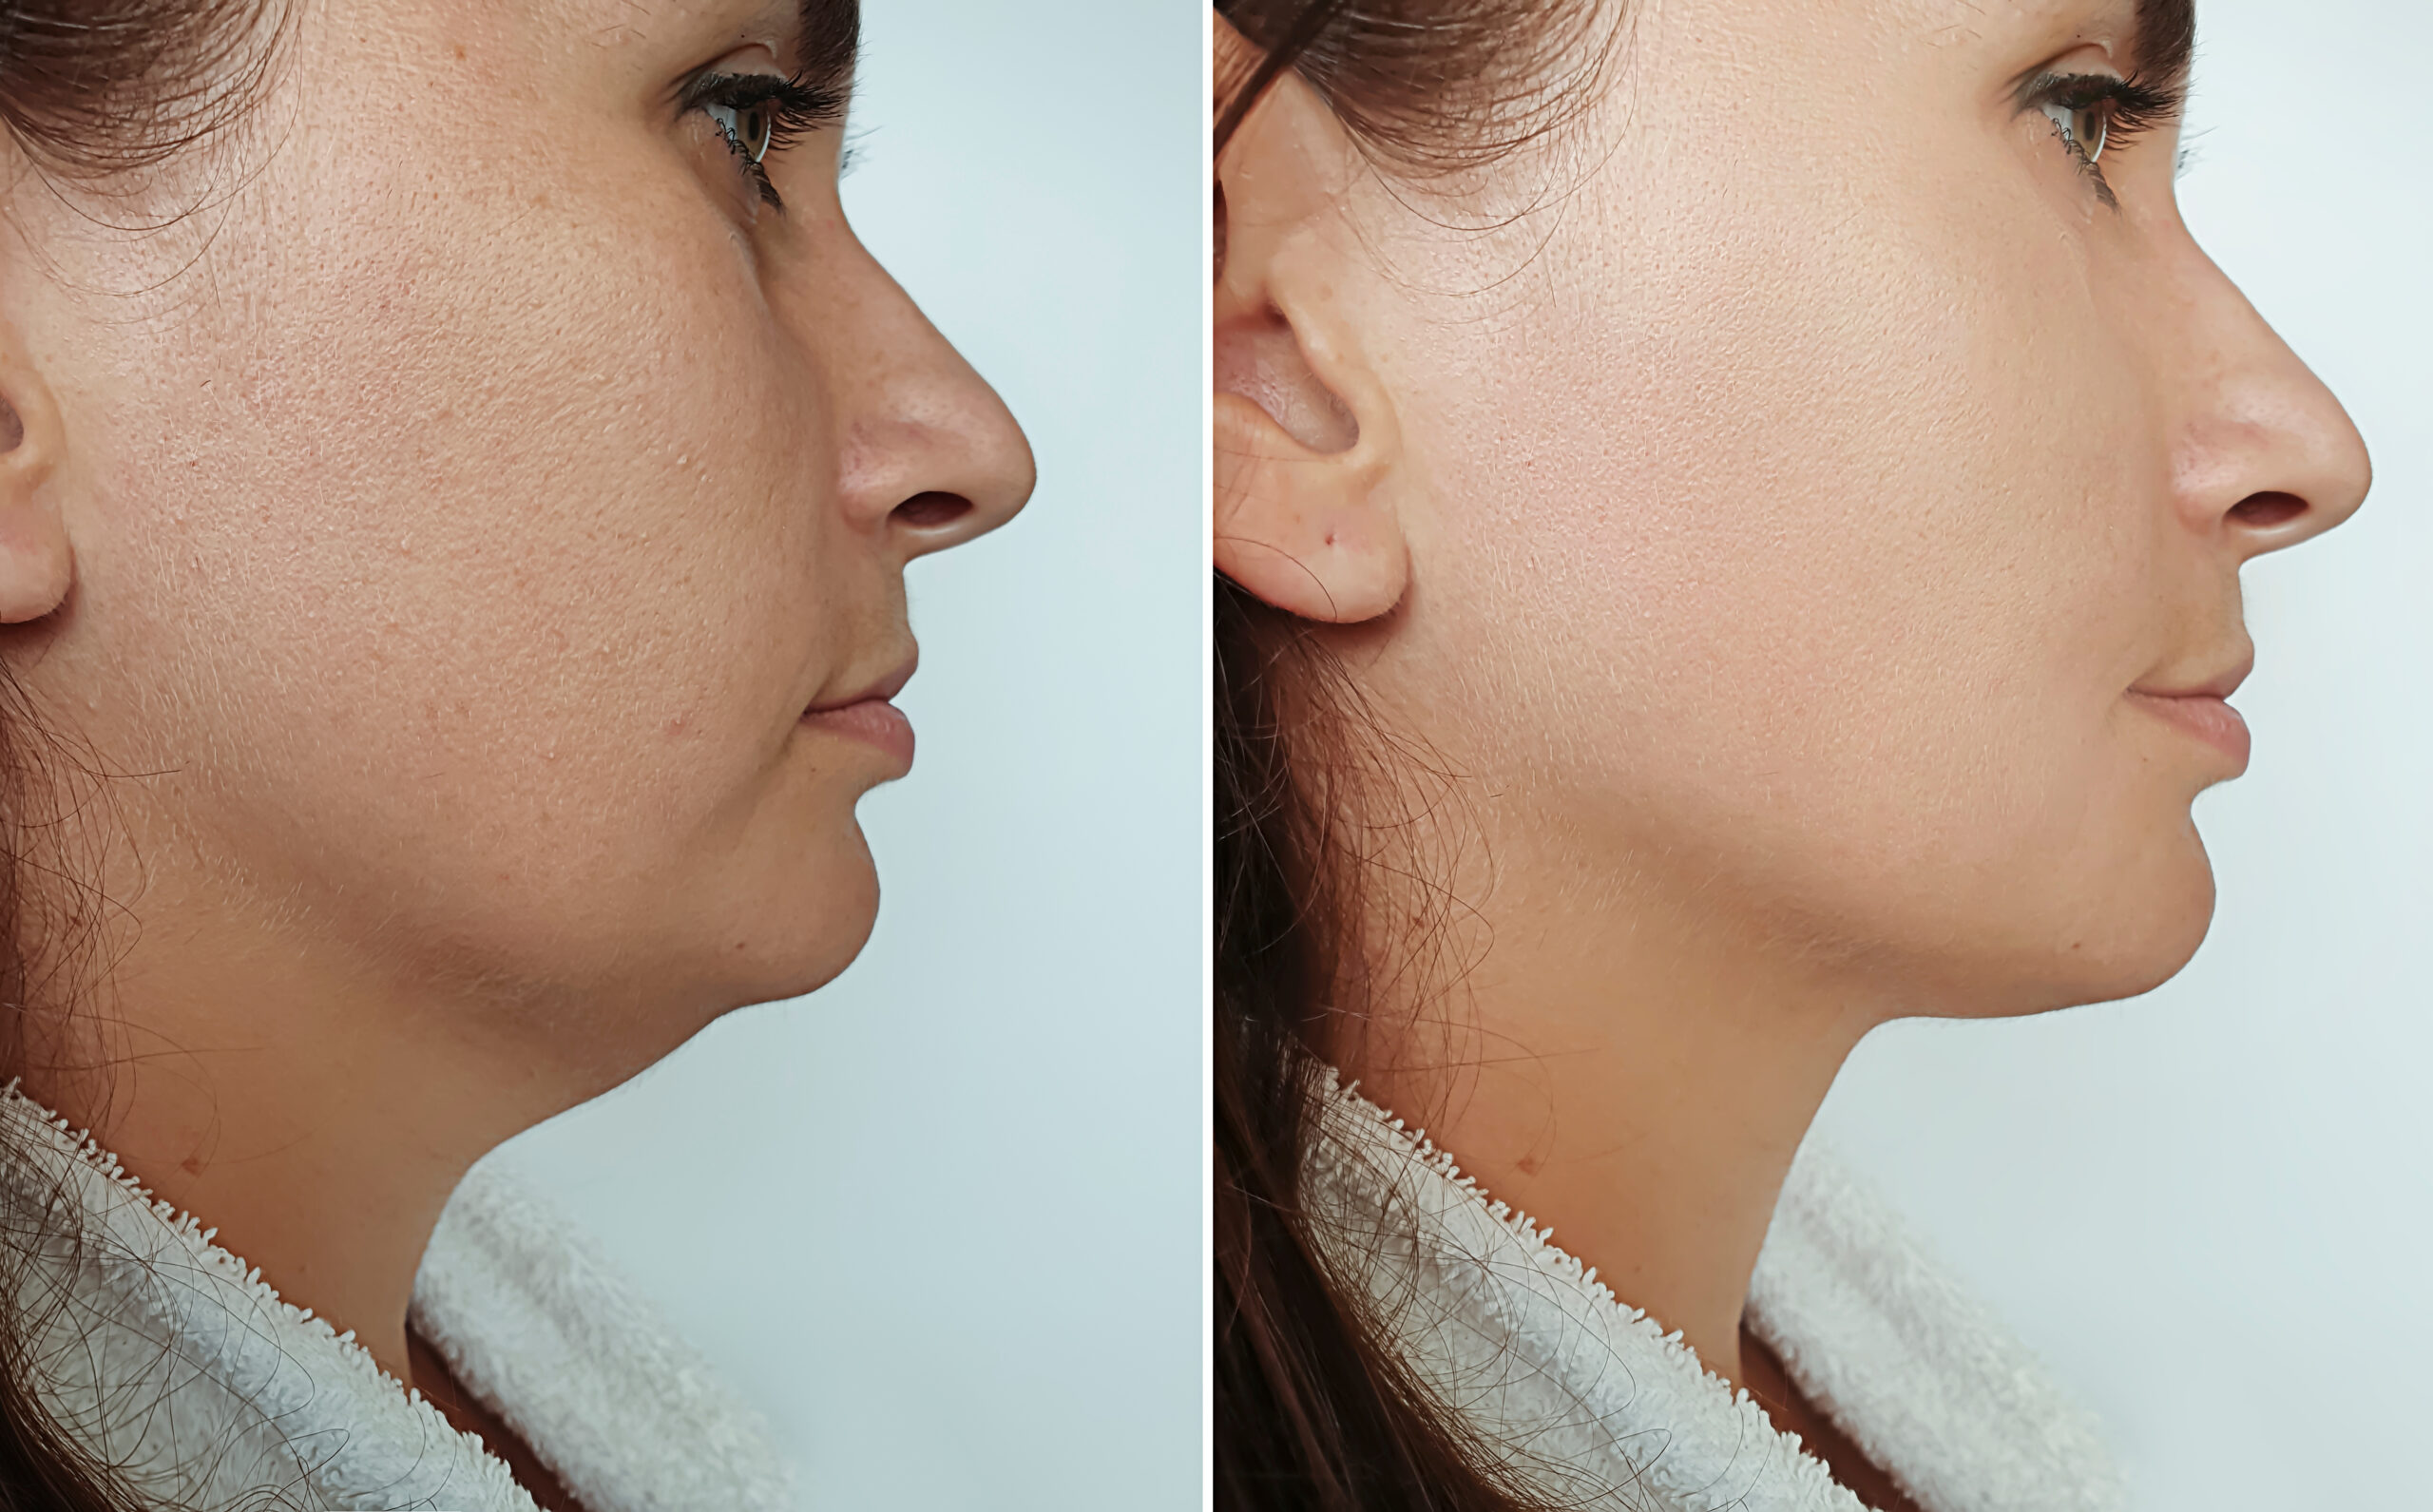 Before and after pictures of a woman who received the Kybella treatment for her double chin.